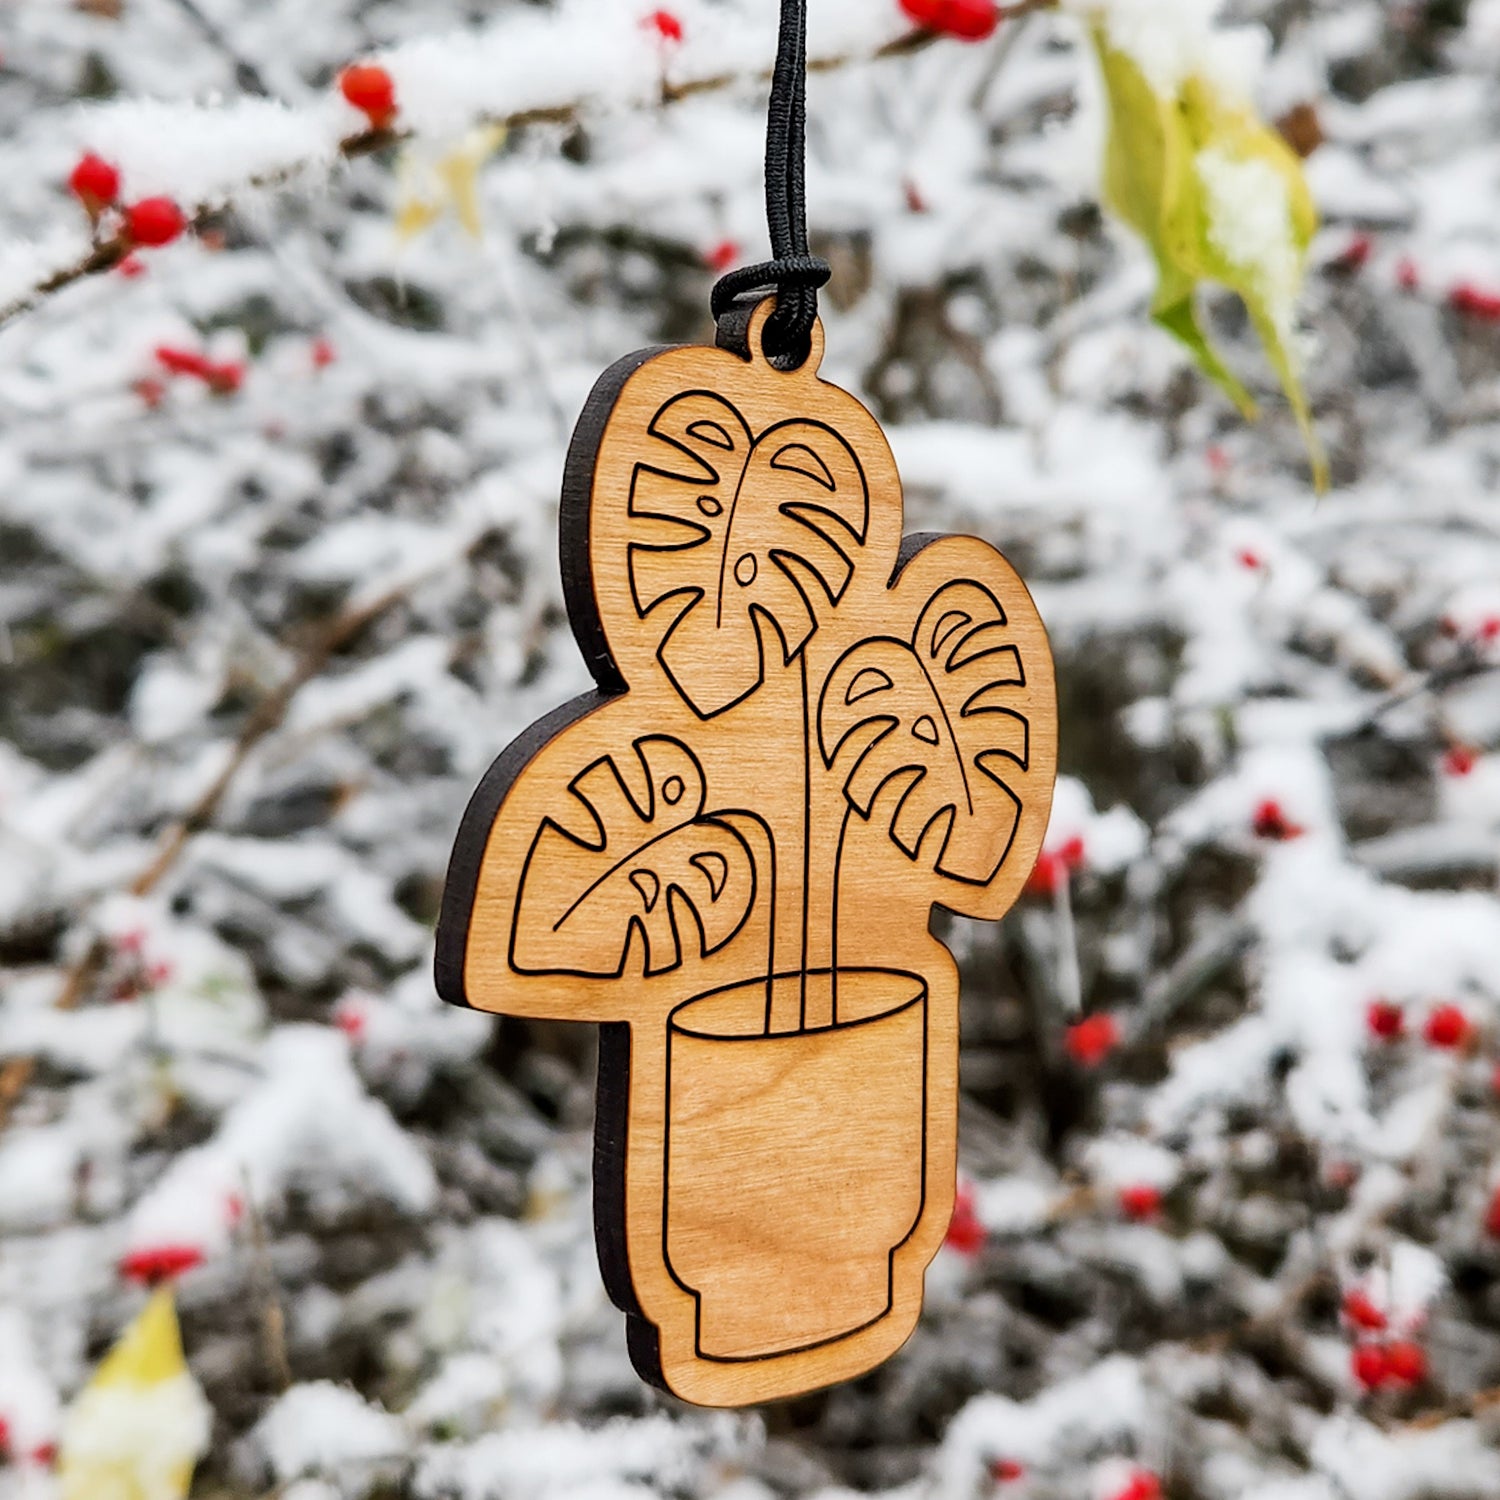 Wood Monstera Leaf Christmas Ornament - Houseplant Gift for Plant Lovers.